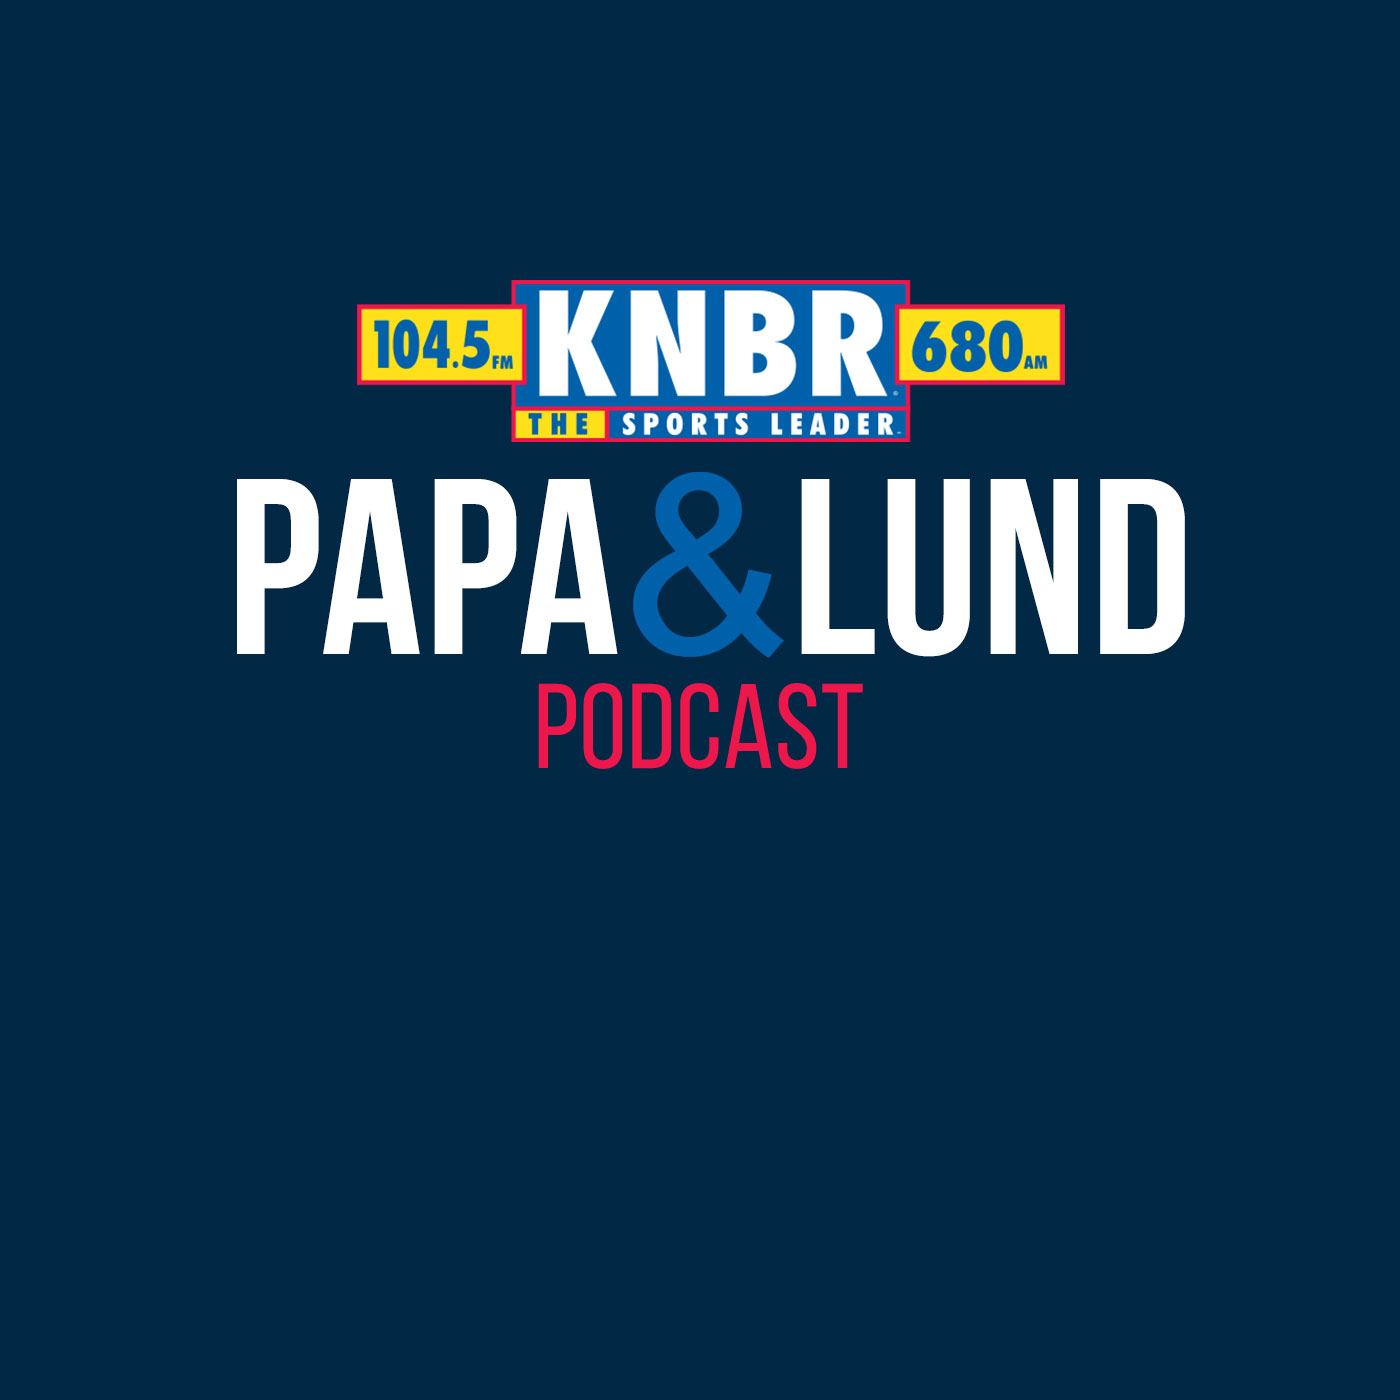 1-21 Matt Maiocco joins Papa & Lund on the eve of the big showdown at Lambeau Field and discusses how Jimmy Garoppolo's injuries may be effected by the cold